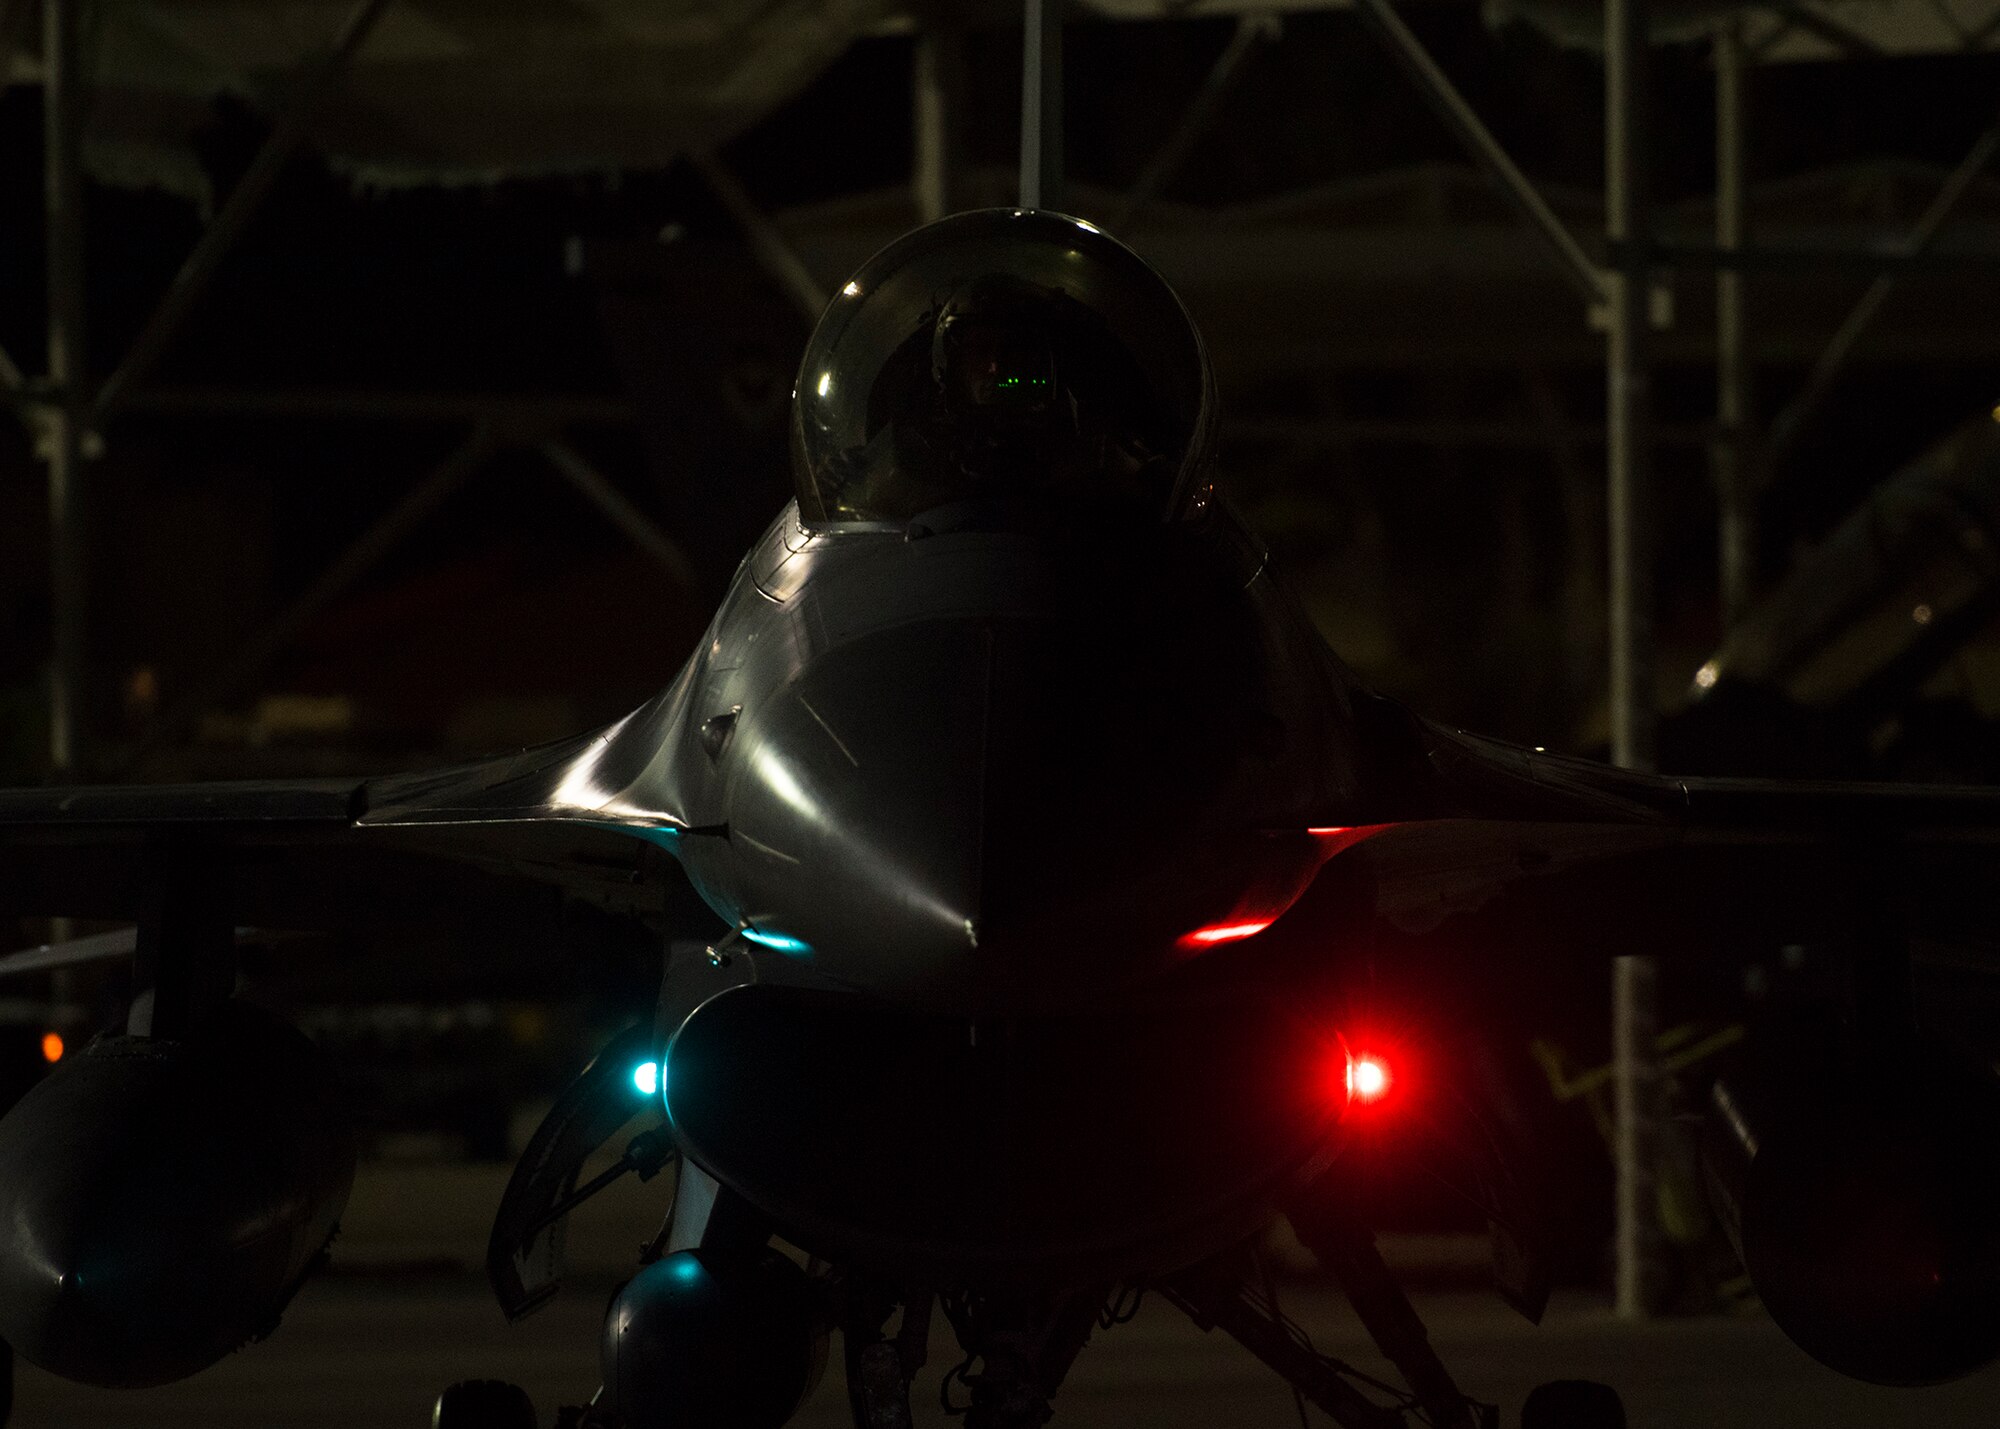 An F-16 Fighting Falcon, assigned to the 310th Fighter Squadron, parks after a flight June 24, 2020, at Luke Air Force Base, Ariz.